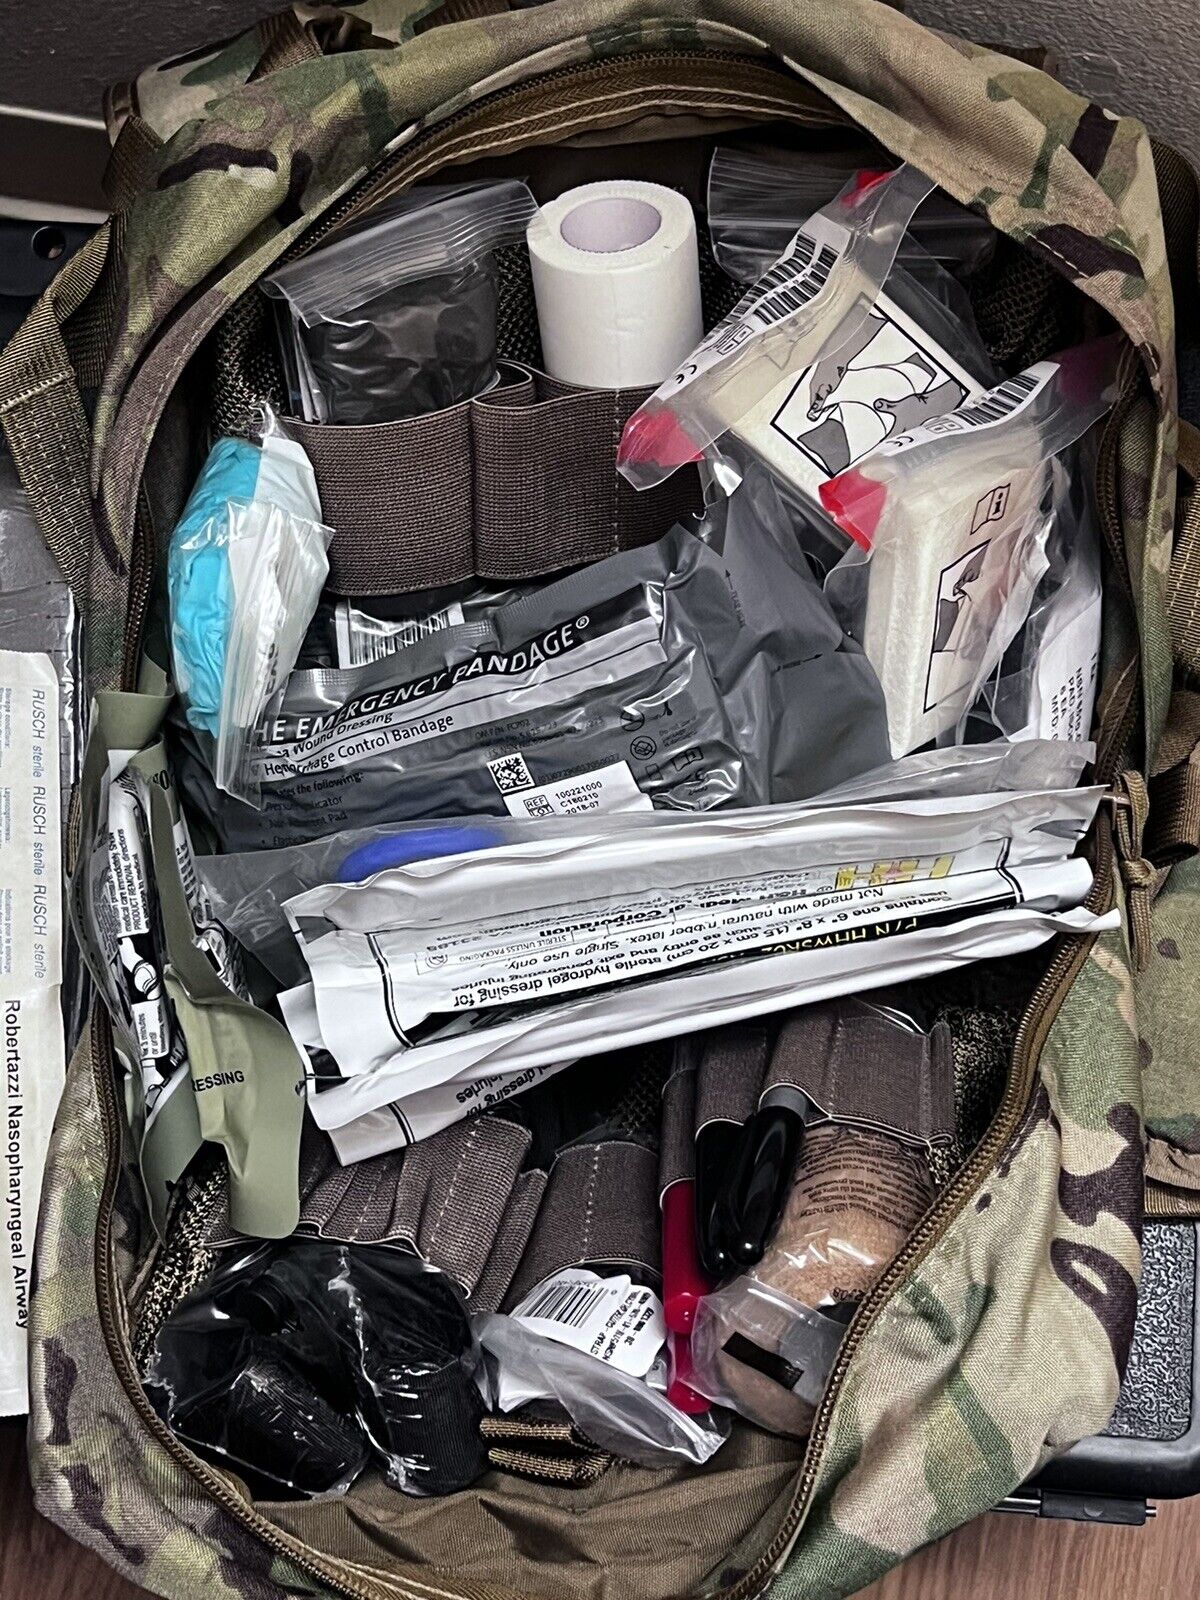 USGI Combat Casualty Care CLS Bag Kit Medic First Aid Multicam OCP Fully Stocked